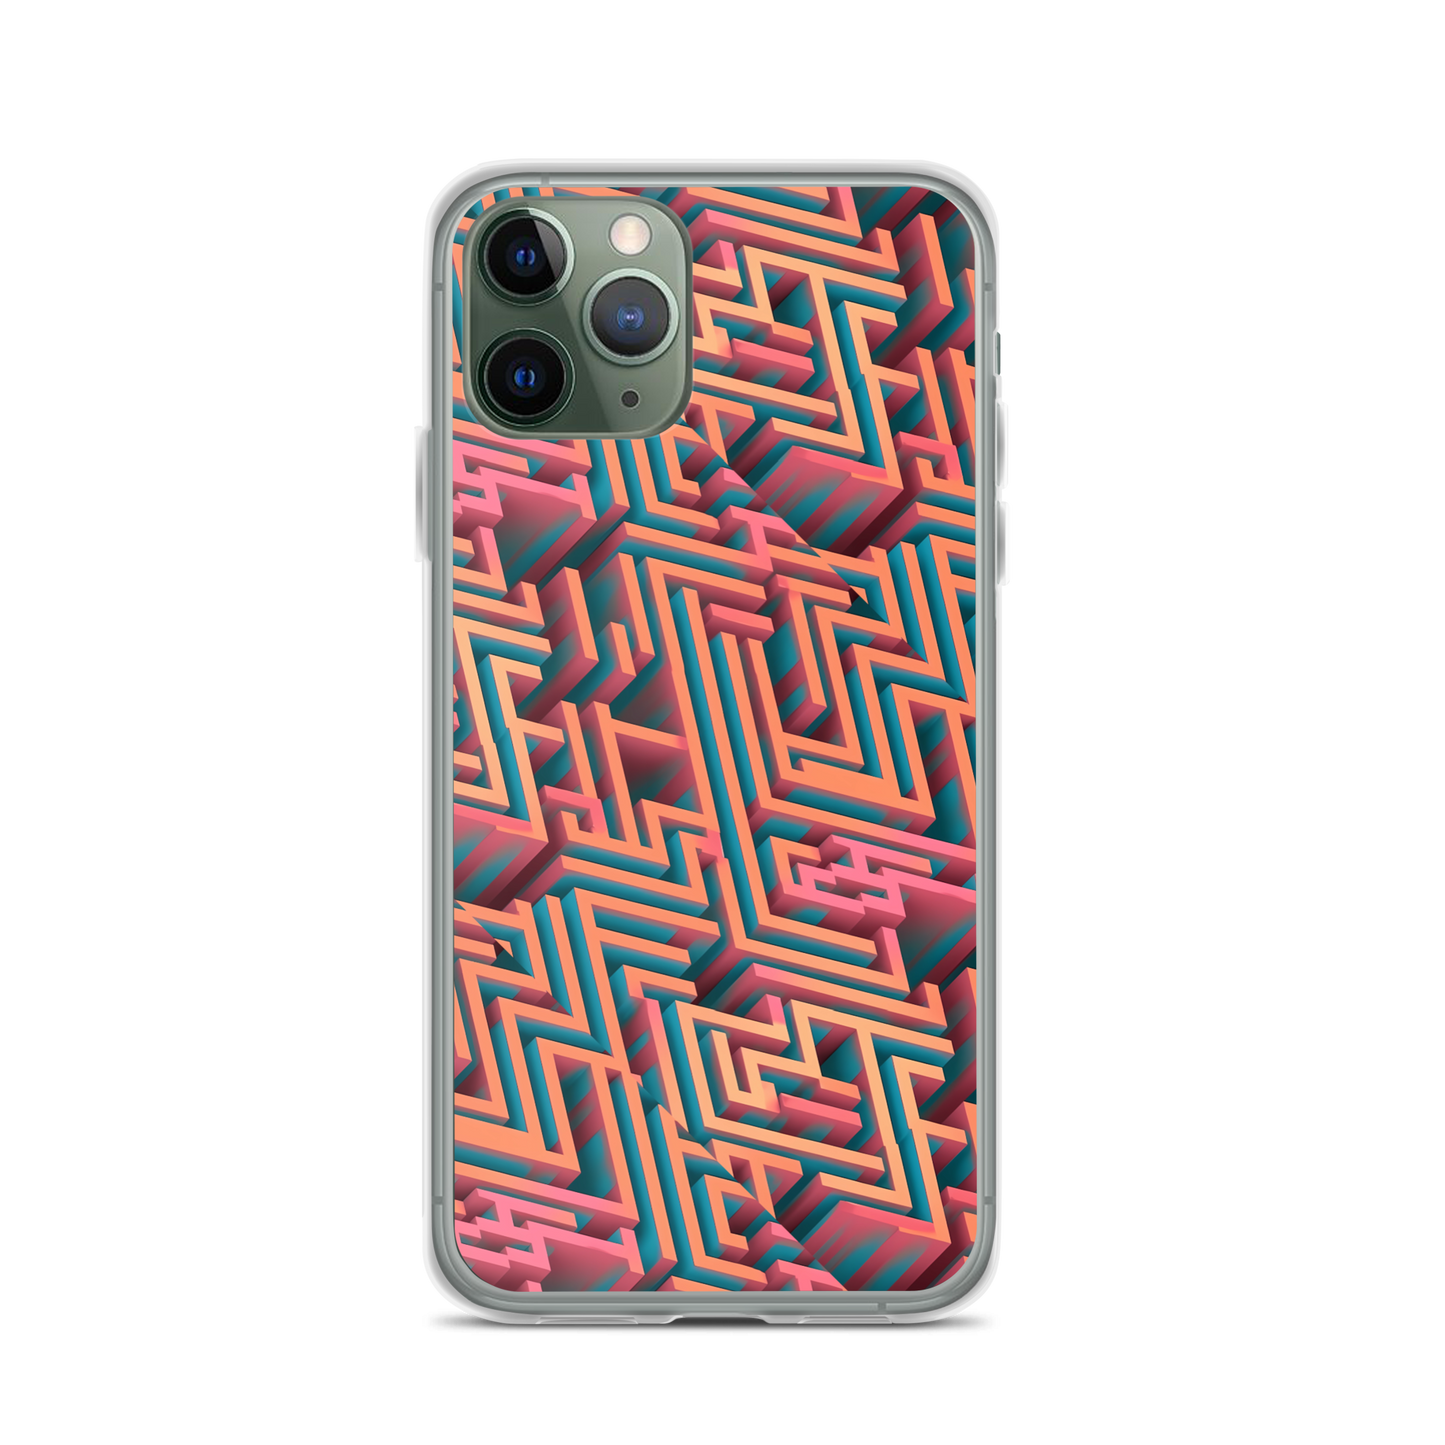 3D Maze Illusion | 3D Patterns | Clear Case for iPhone - #1